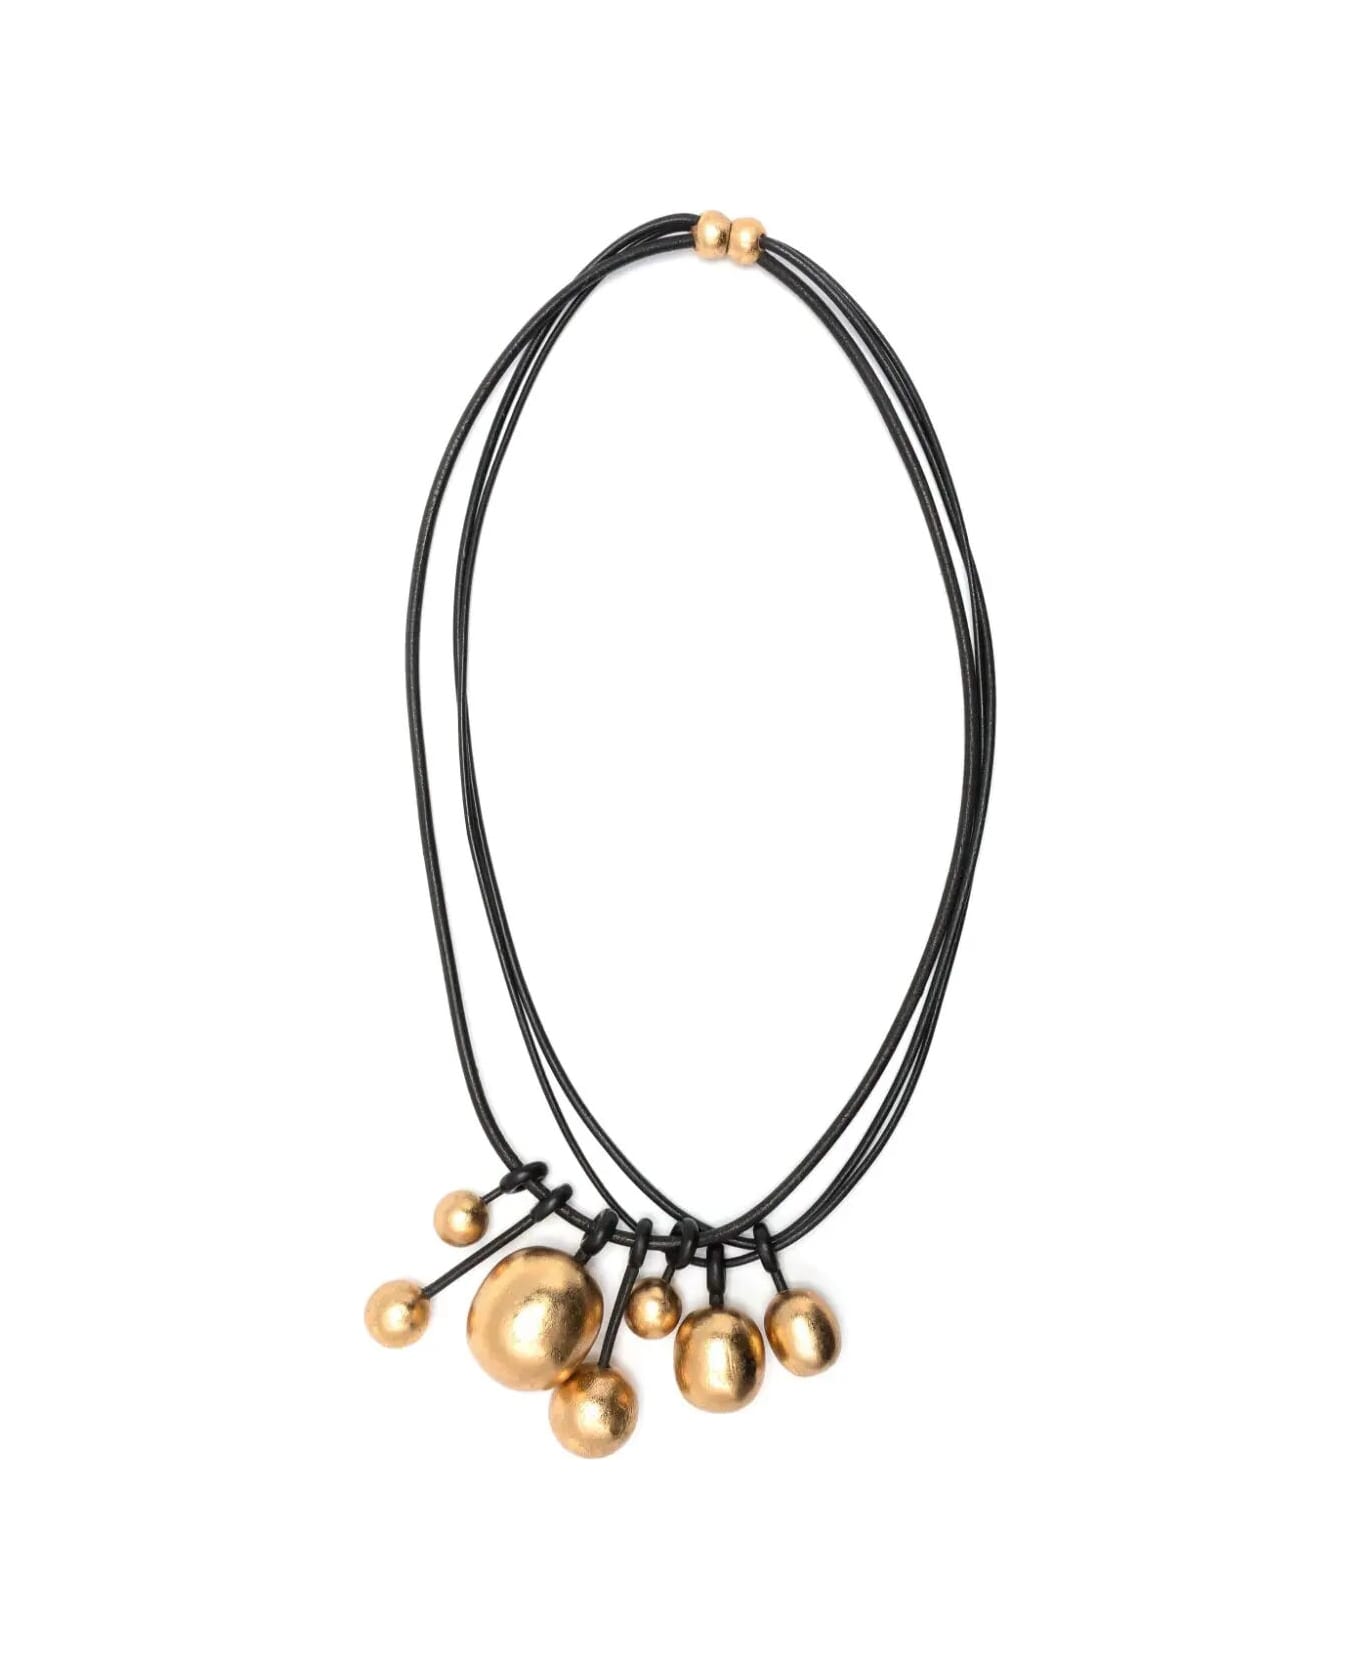 Monies Salix Necklace - Black And Gold